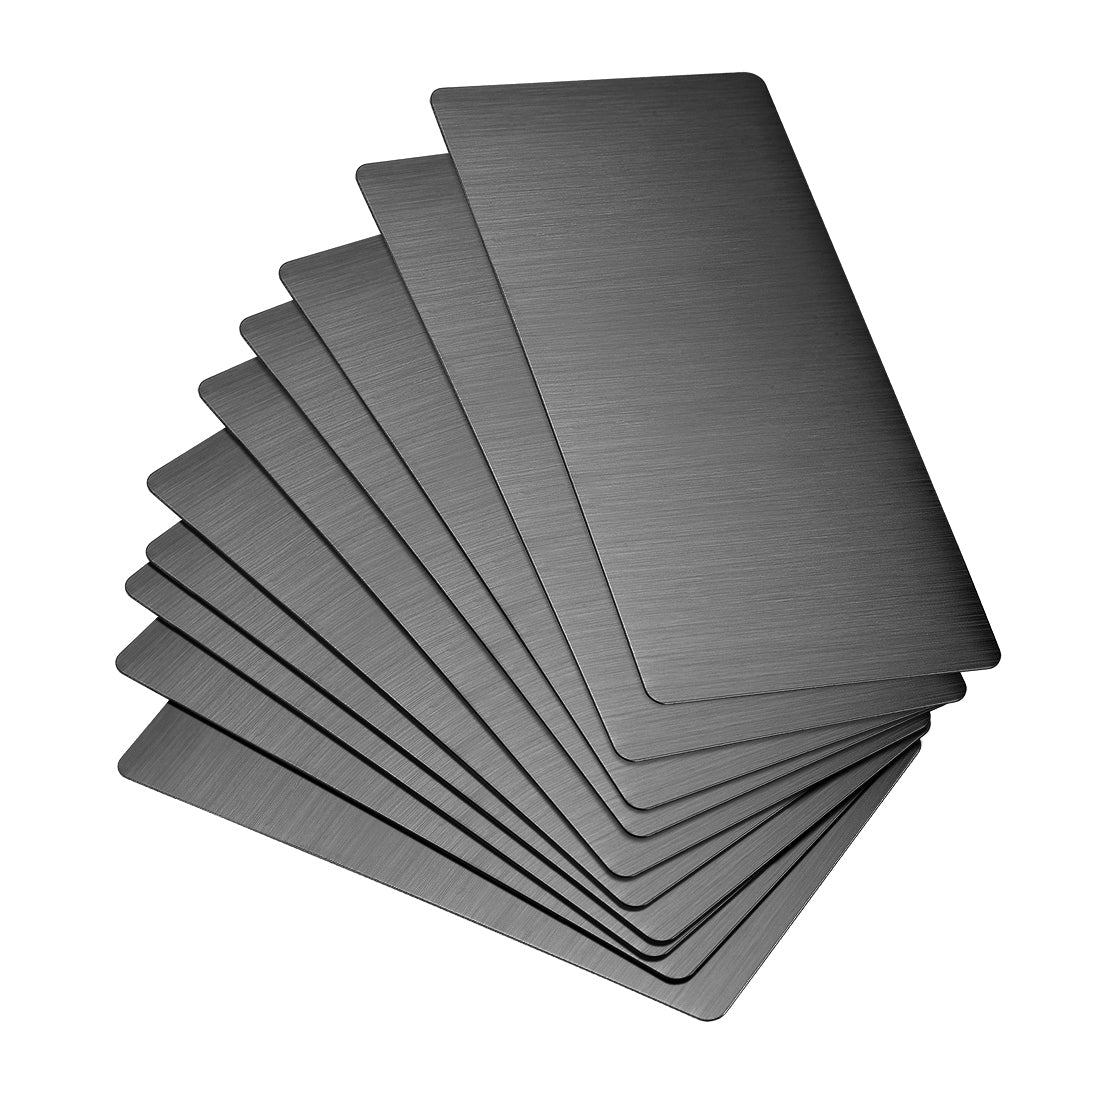 Uxcell Uxcell Blank Metal Business Card 100x60x0.4mm Brushed 201 Stainless Steel Plate for DIY Laser Printing Silver Tone 15 Pcs